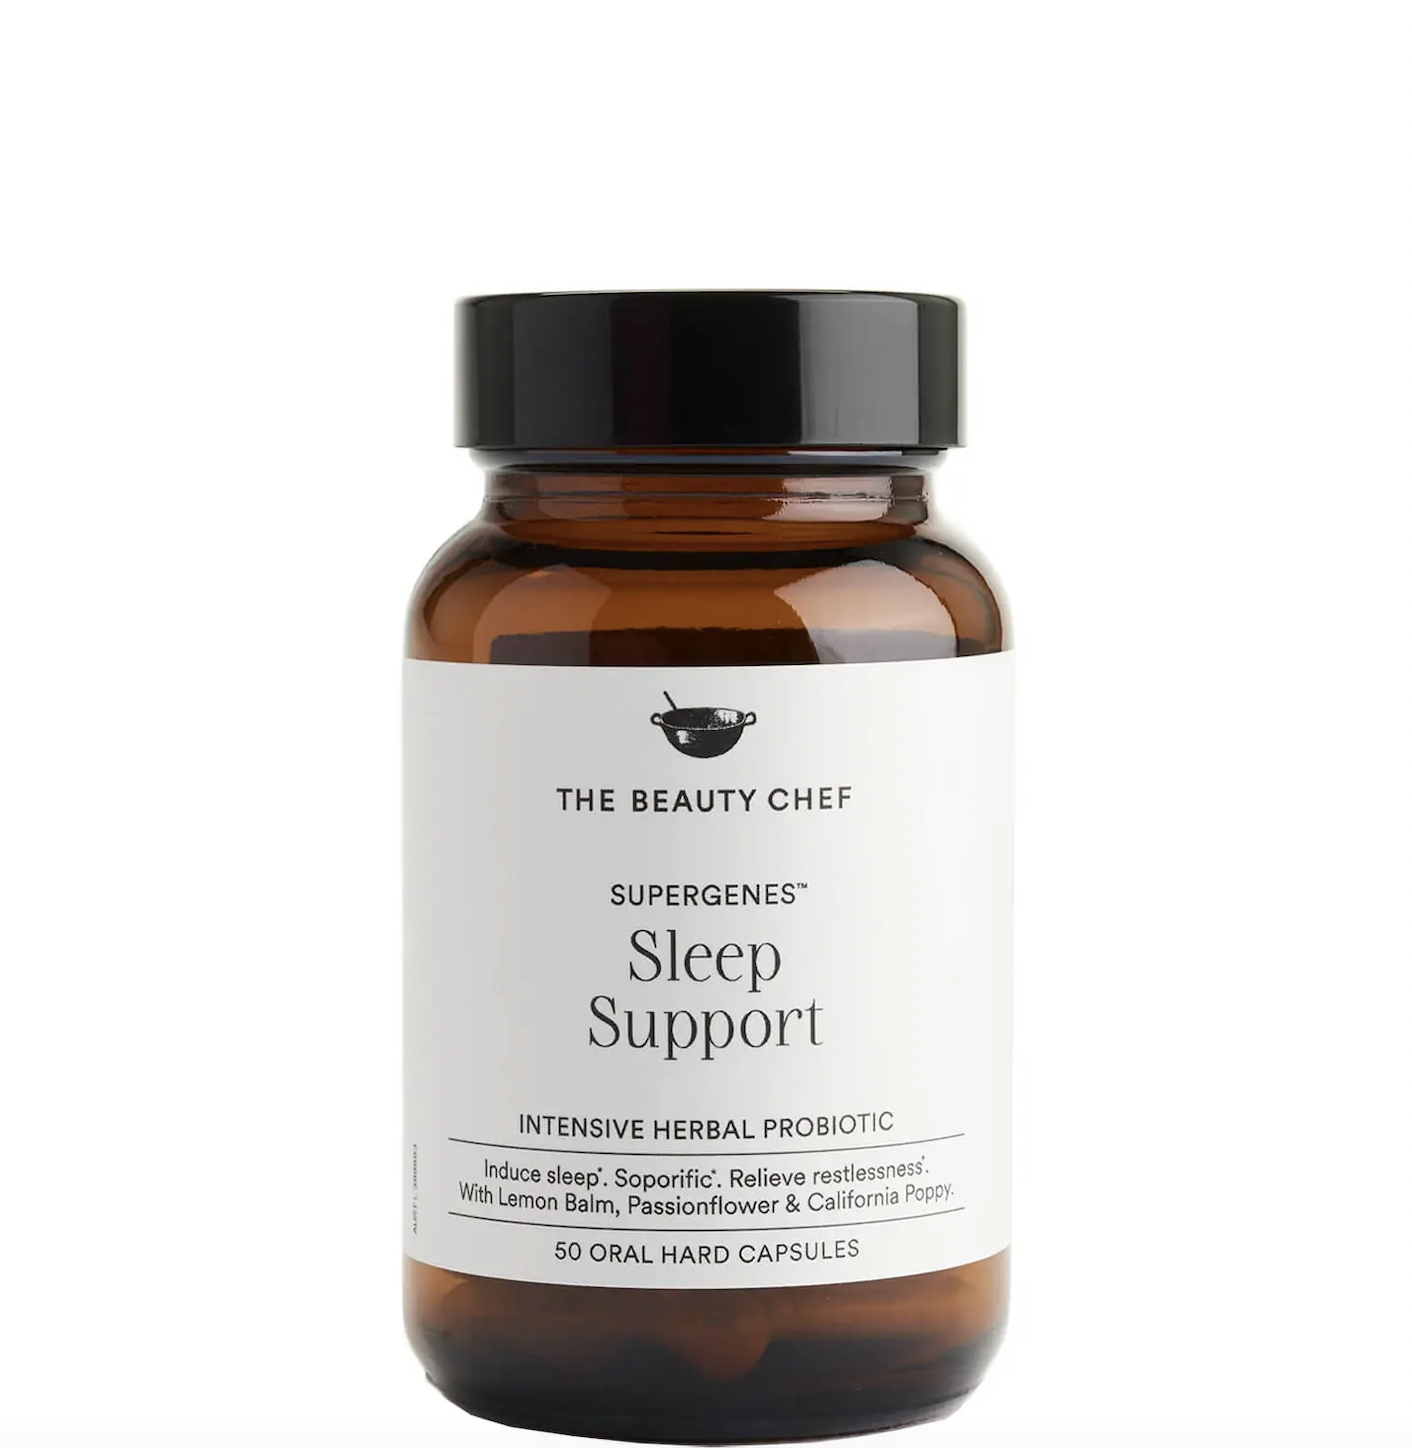 THE BEAUTY CHECK SUPERGENES SLEEP SUPPORT 